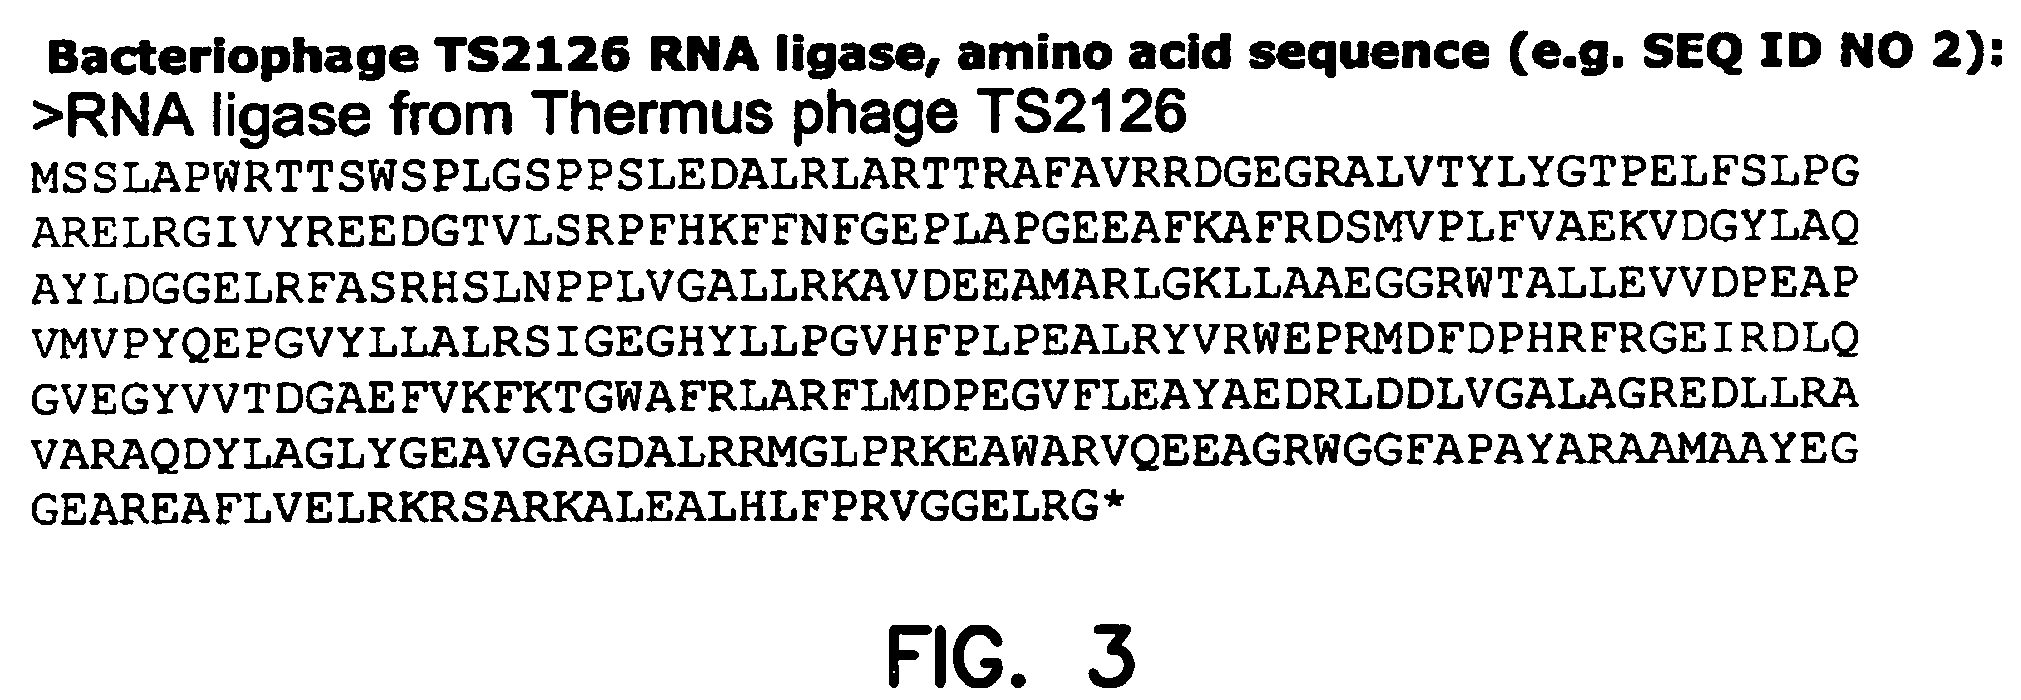 Thermostable RNA ligase from thermus phage